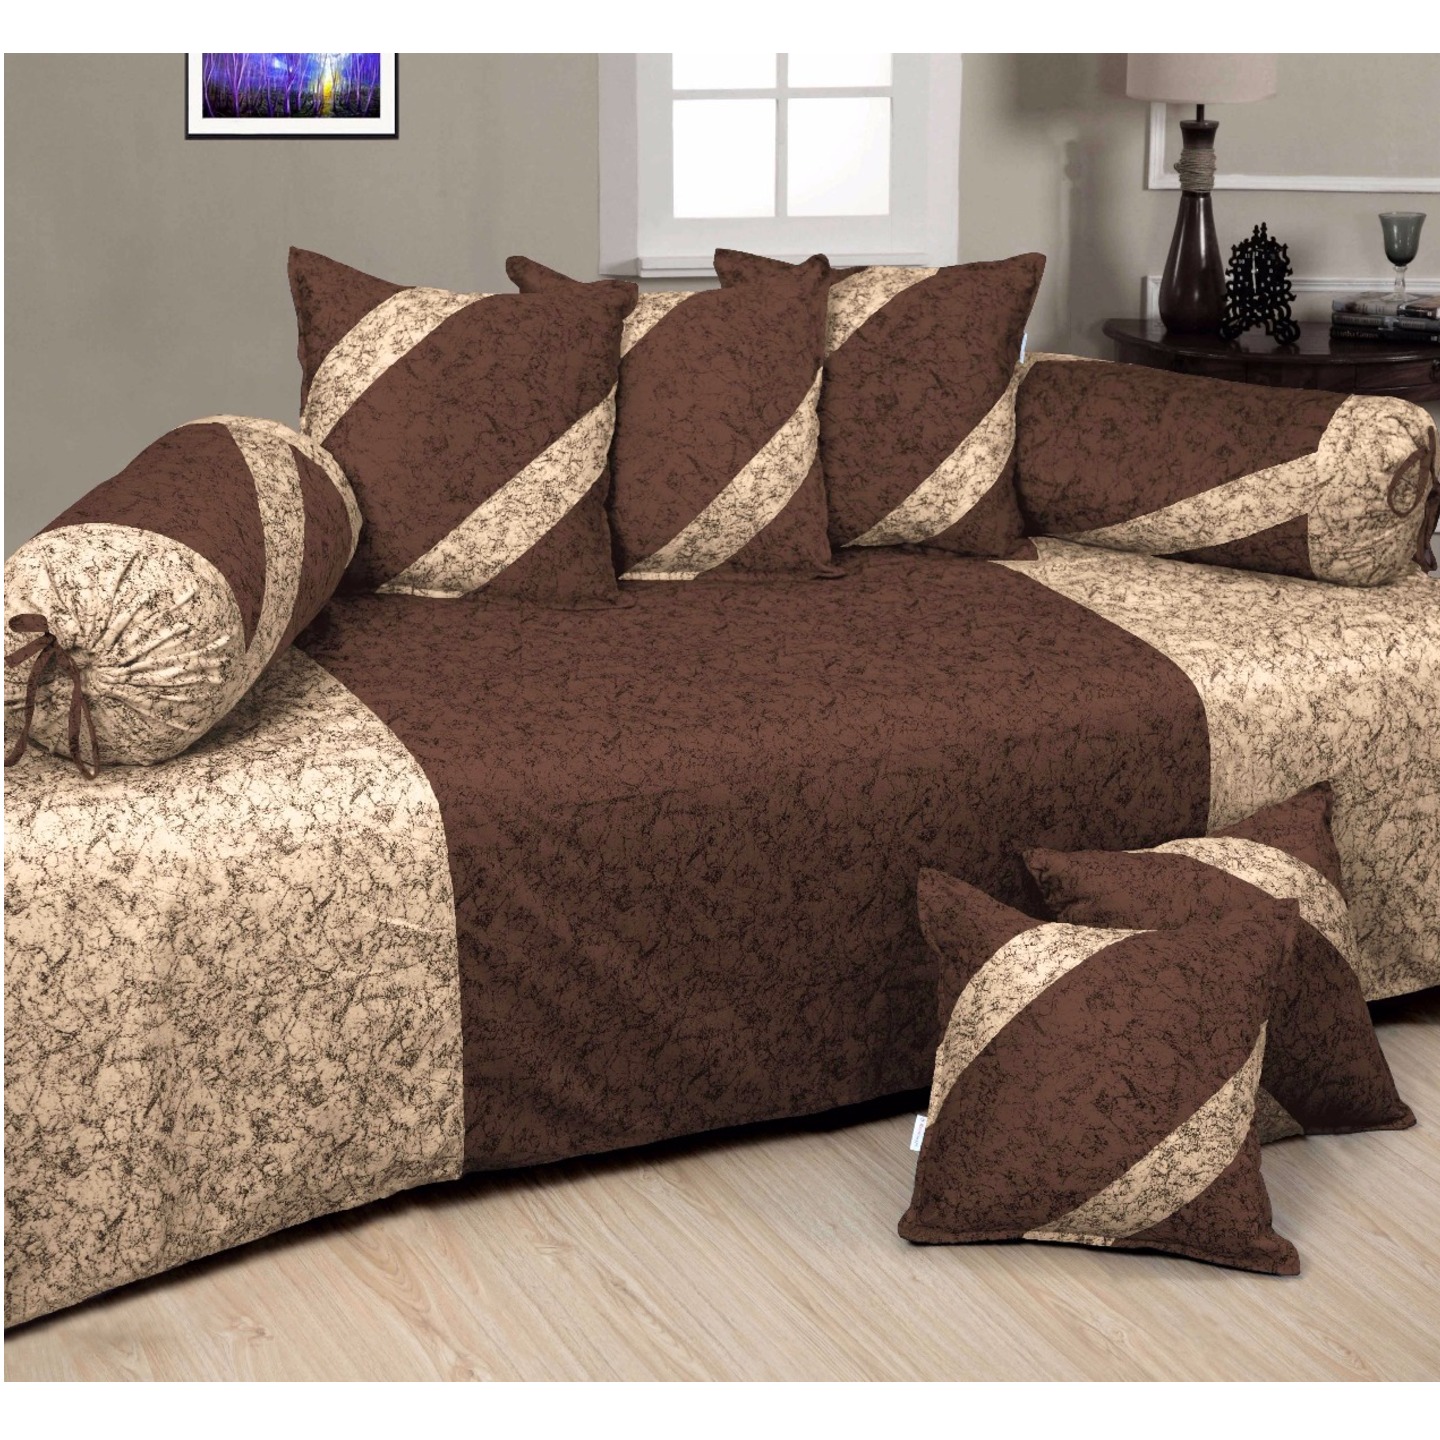 HandTex Home Presents Velvet Coffee & Gold Color Diwan Set with 1 Single Bedsheet with 5 Cushion Covers & 2 Blosters Set of 8 pcs